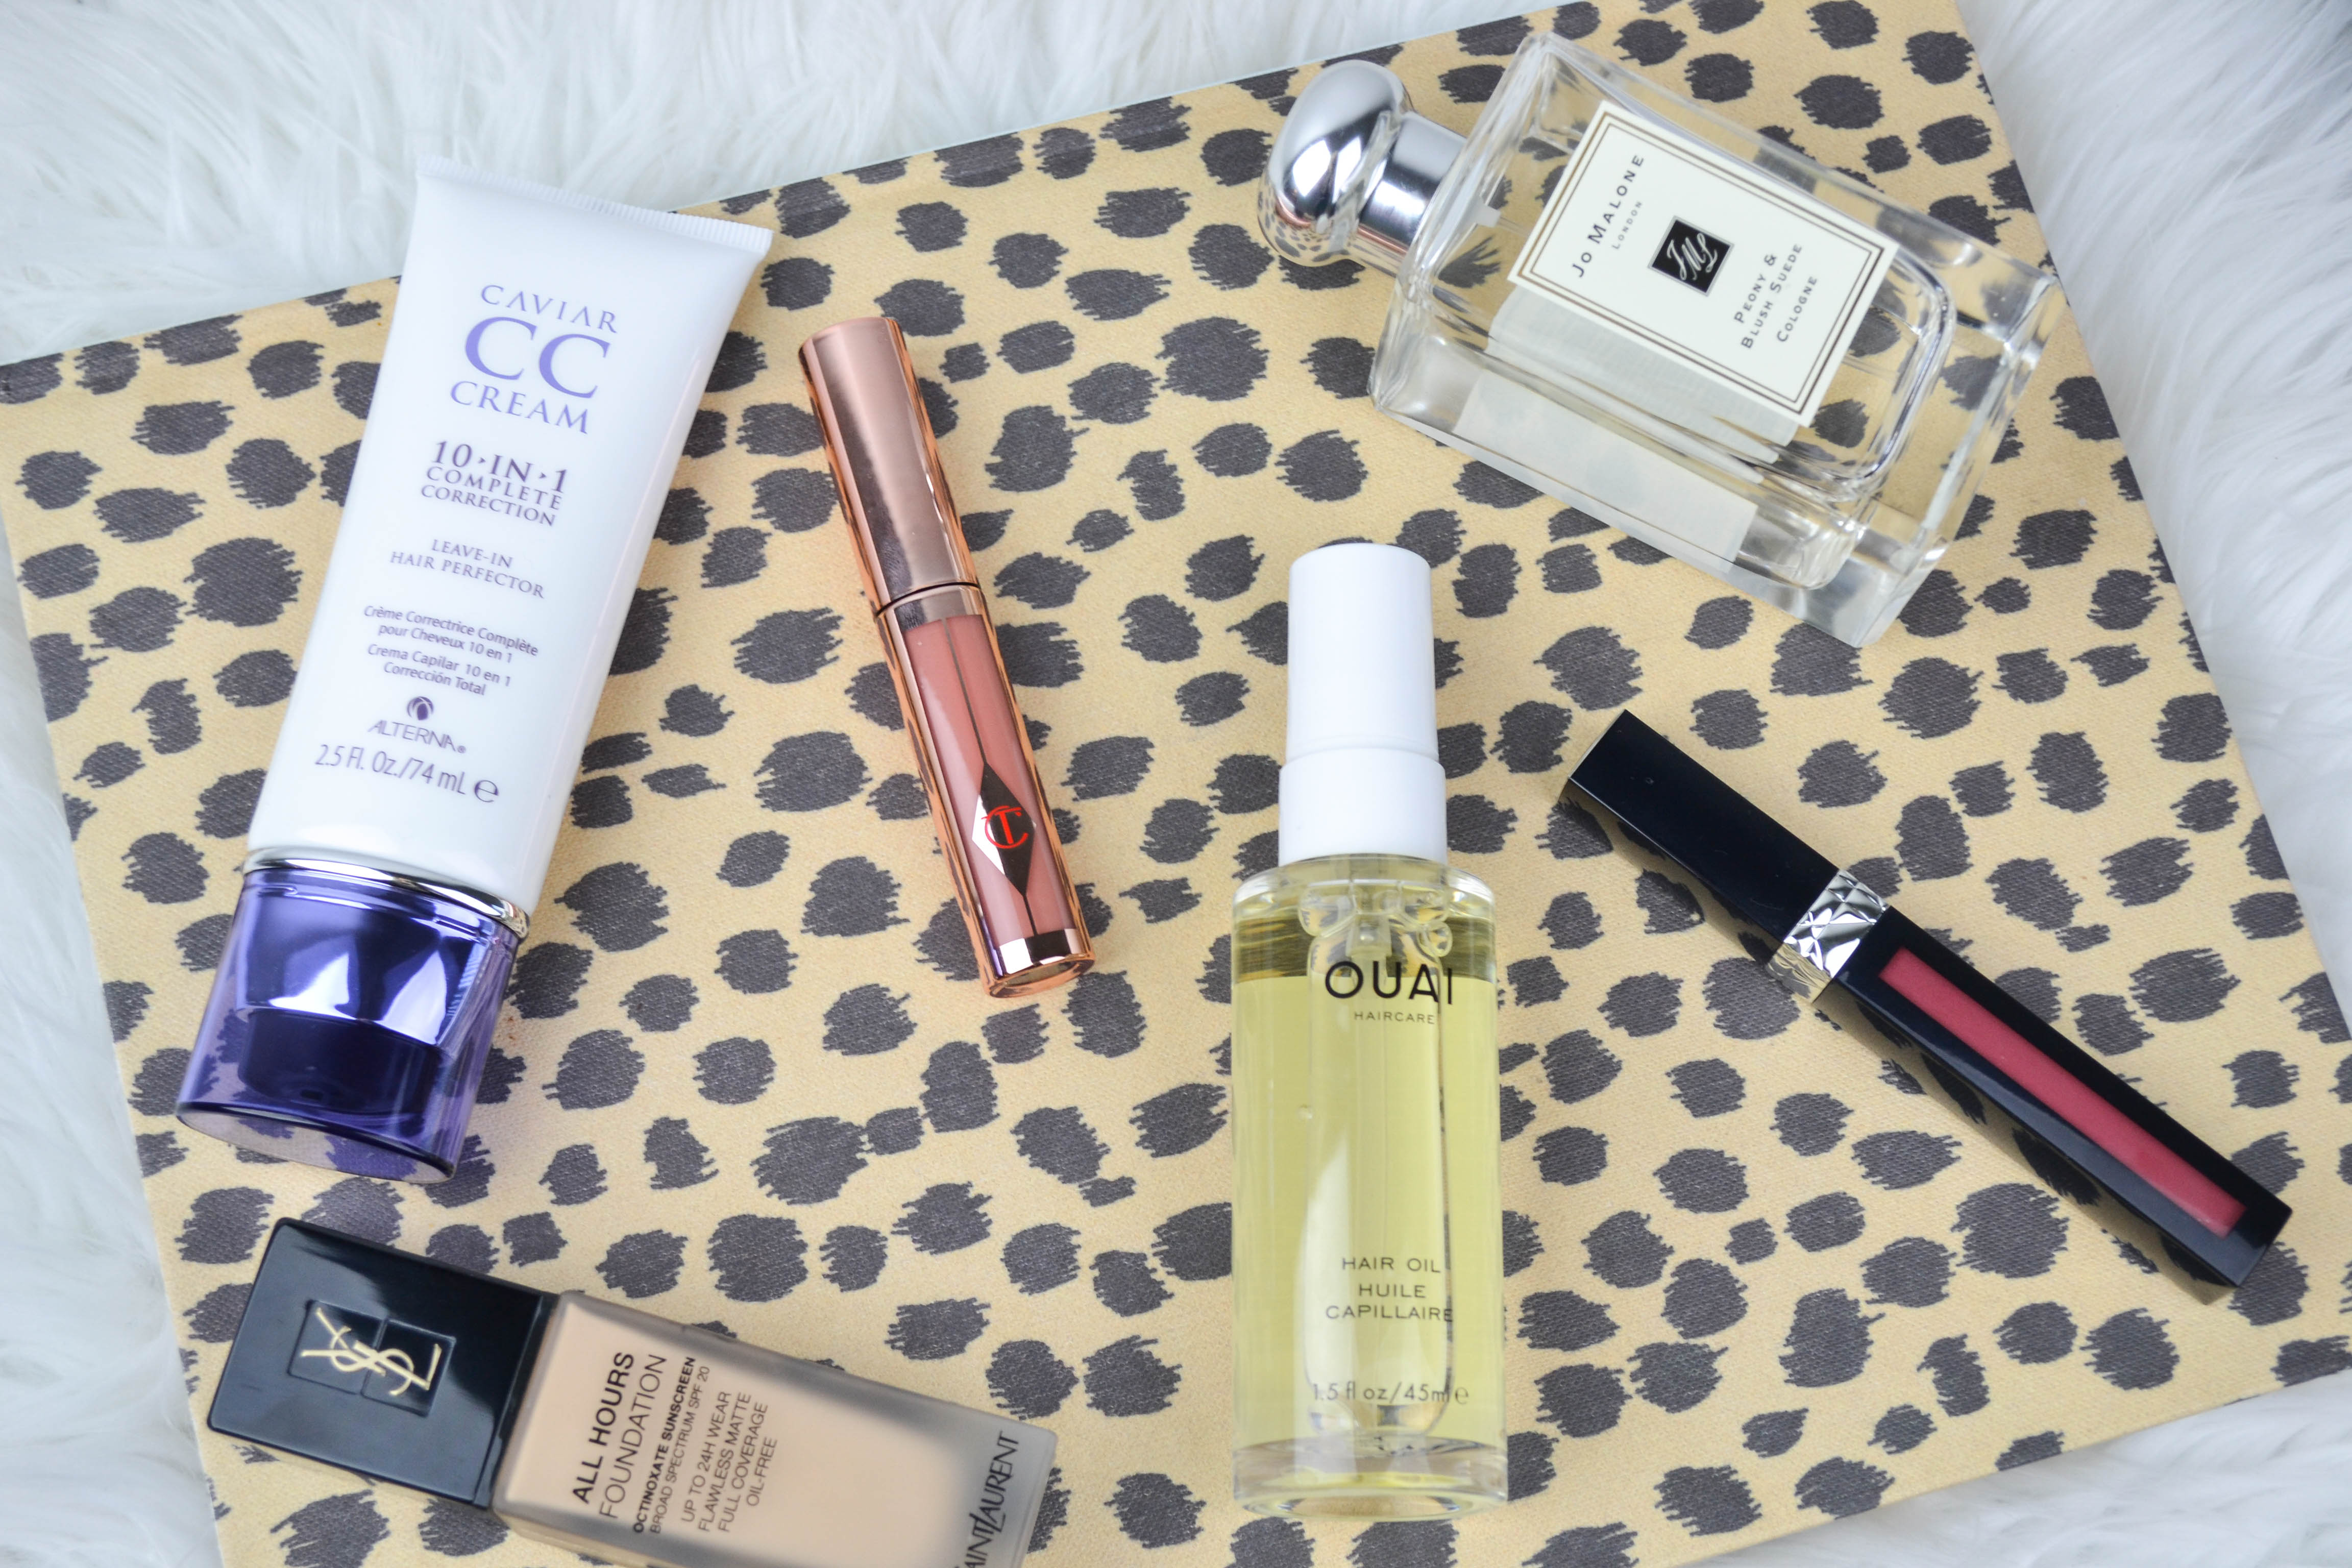 high end beauty products worth the money, luxury beauty buys, expensive beauty products